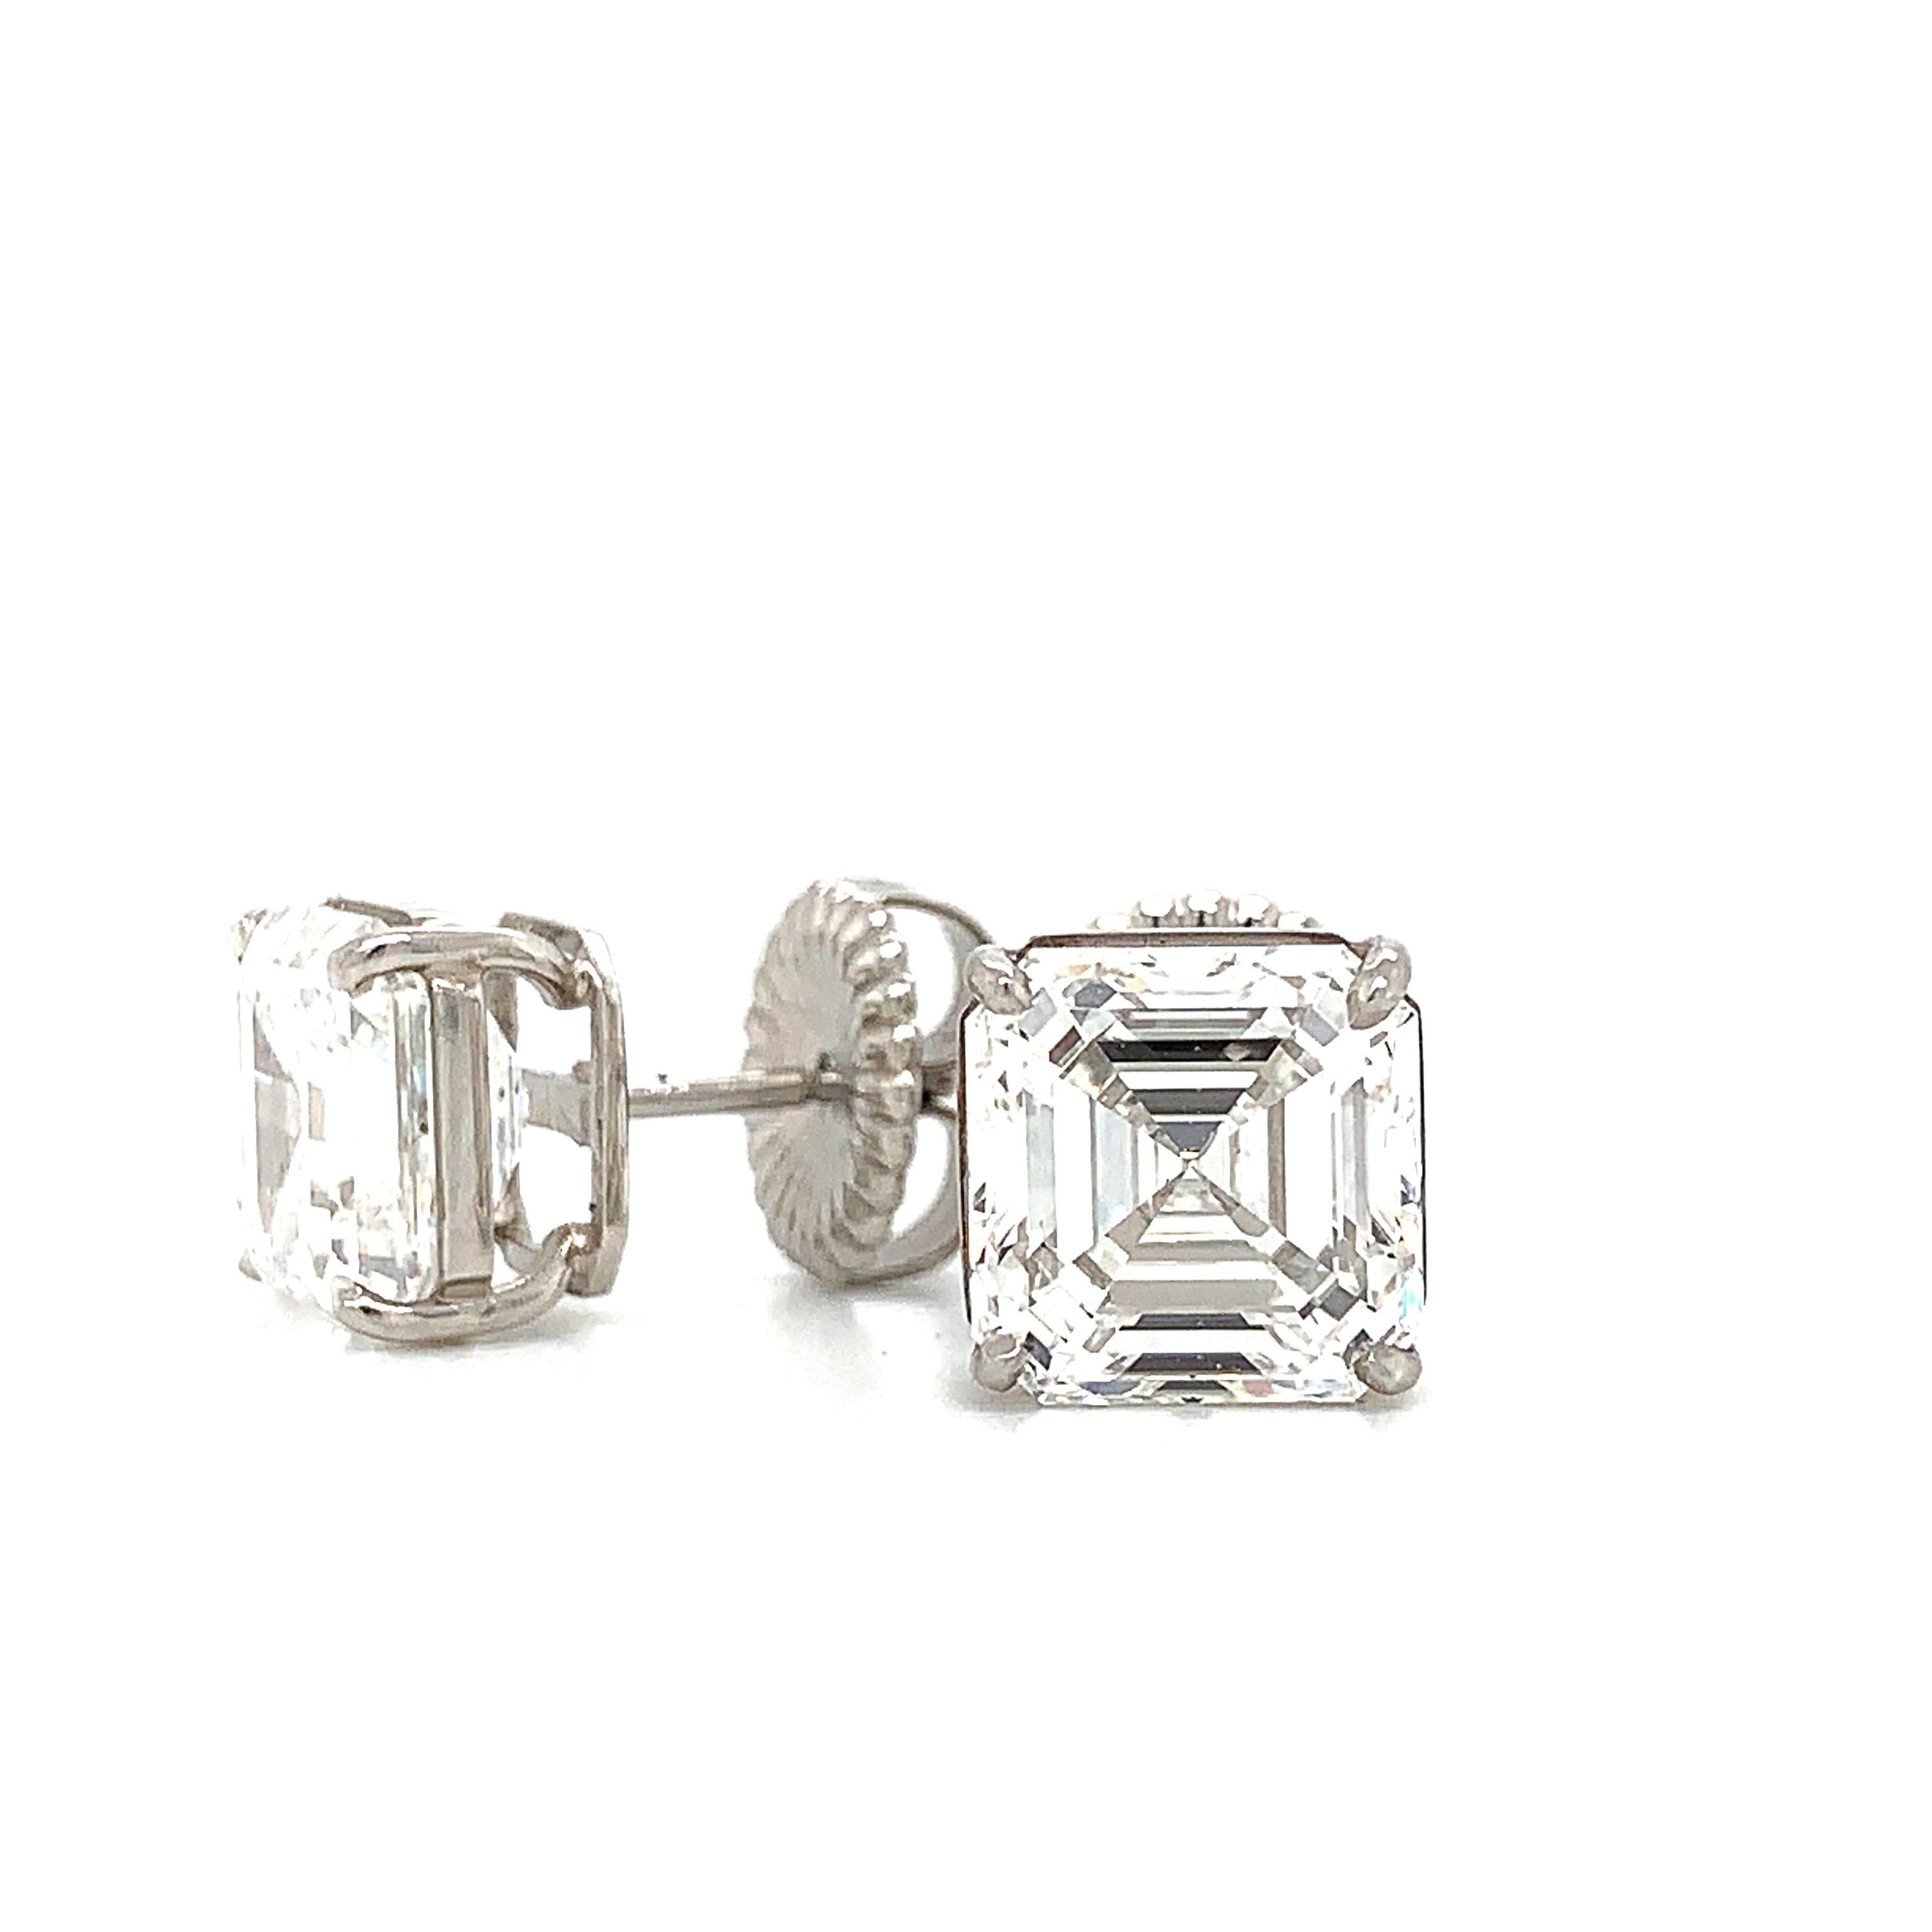 These astonishing matching pair of asscher cut (square emerald) cut diamond studs are mounted in hand made platinum.Graded by the GIA to be F-G color VS2 clarity. 
And weigh over 4 carats each. 

This pair of extraordinary 4 carat diamonds are rare